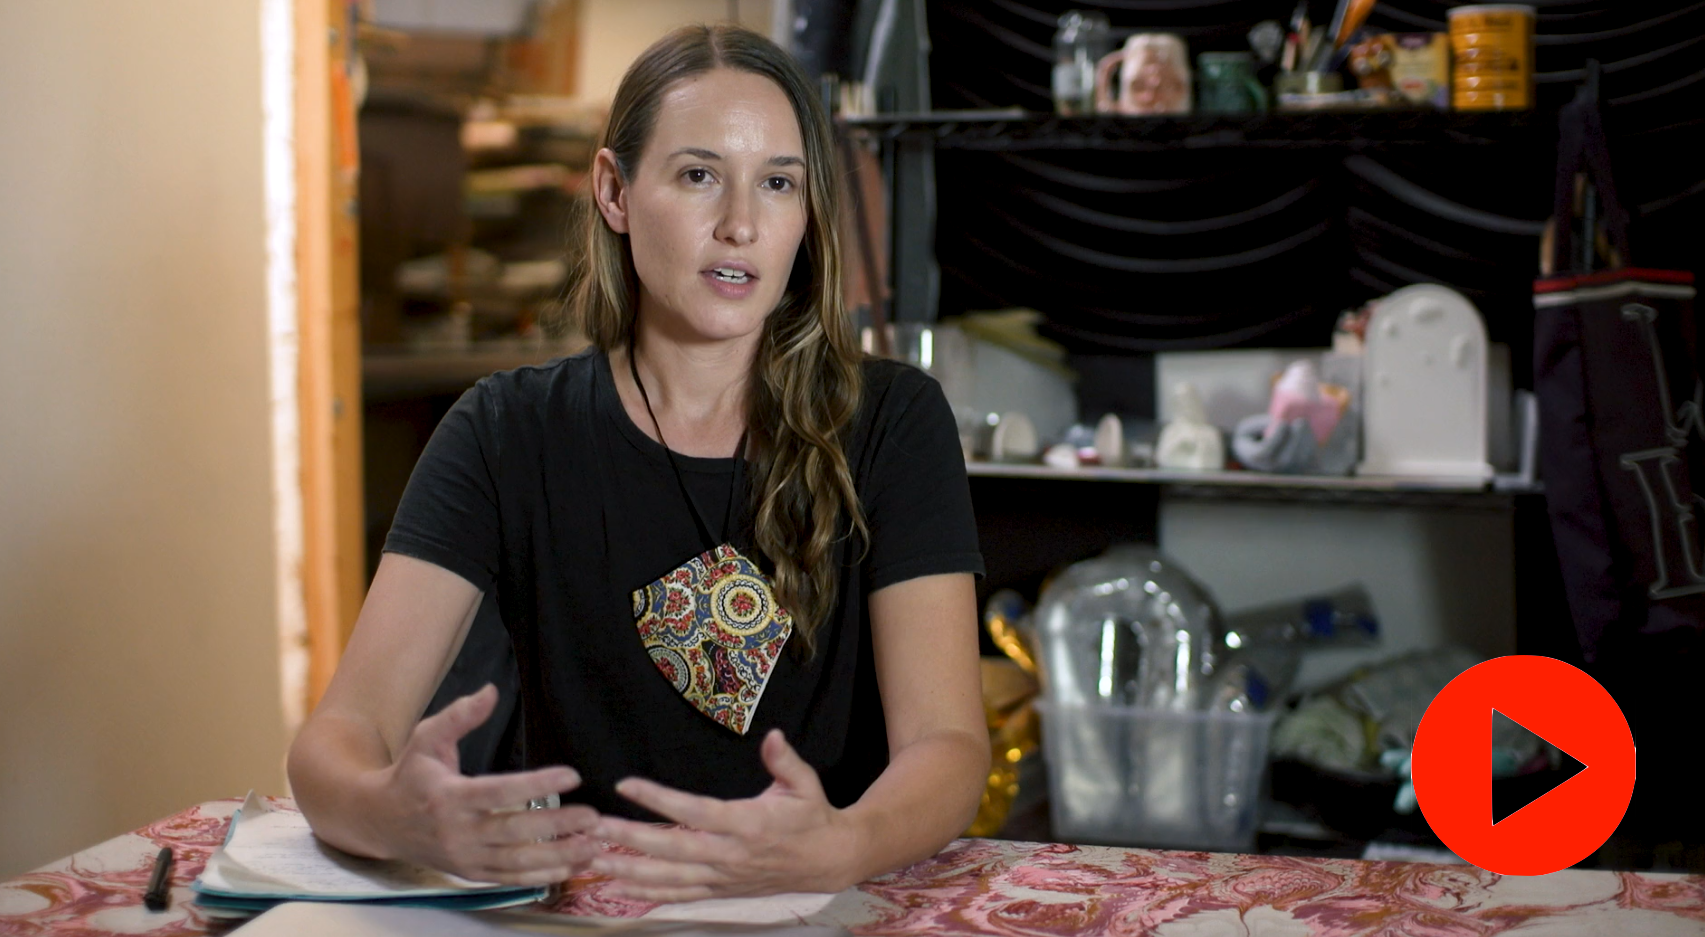 Video still of Laura Shill in a black tee shirt at table. Her brown hair is let down and she is wearing a necklace with a large rhombus shaped pendant painted in an abstract pattern. 